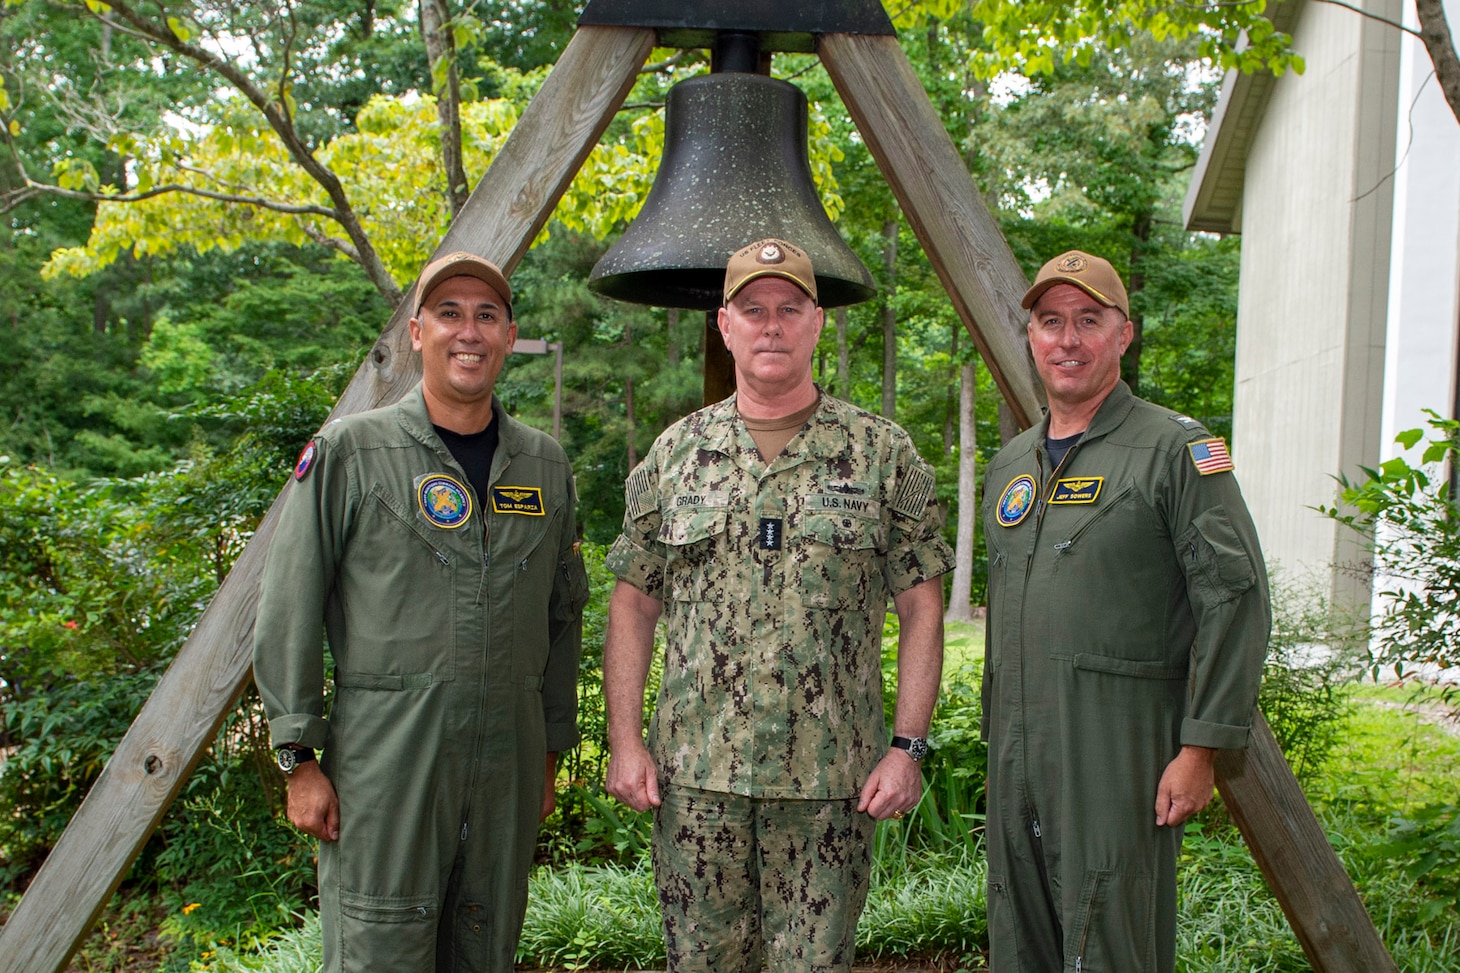 Adm. Christopher W. Grady, commander, U.S. Fleet Forces Command, poses with Capt. Thomas A. Esparza, left, and Capt. Jeffery D. Sowers after their change of command at Naval Weapons Station Yorktown, July 8, 2021.